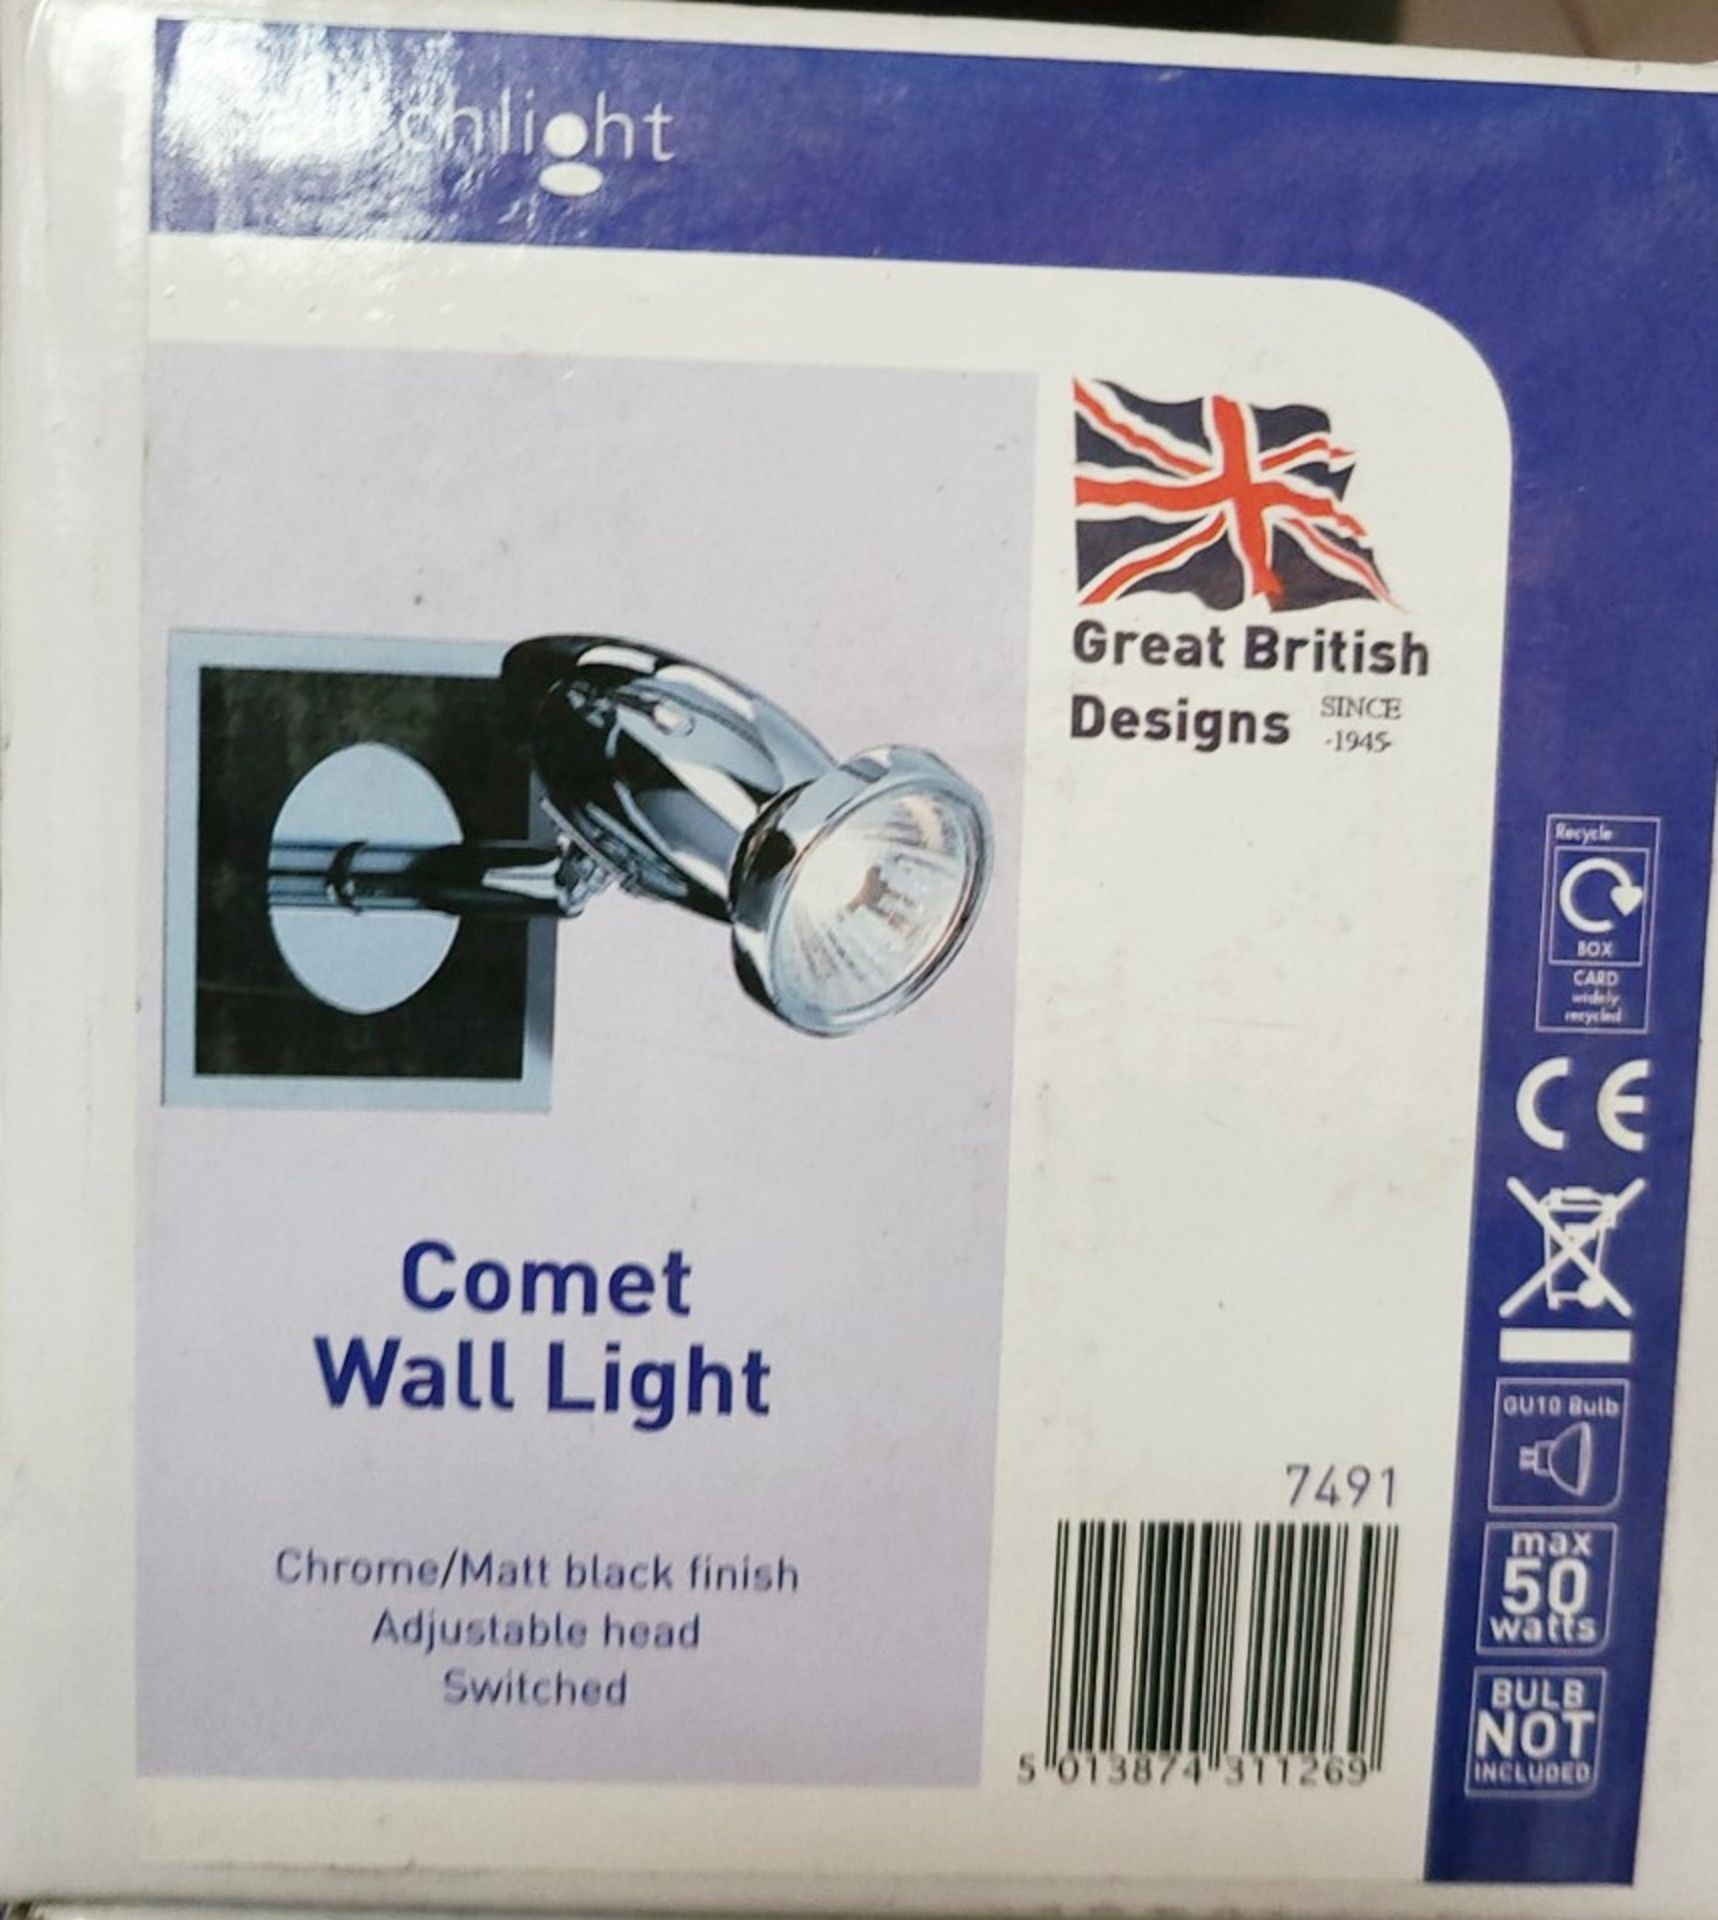 4 x SEARCHLIGHT Comet Wall Light With A Chrome & Black Finish With Adjustable Head and Flick Switch